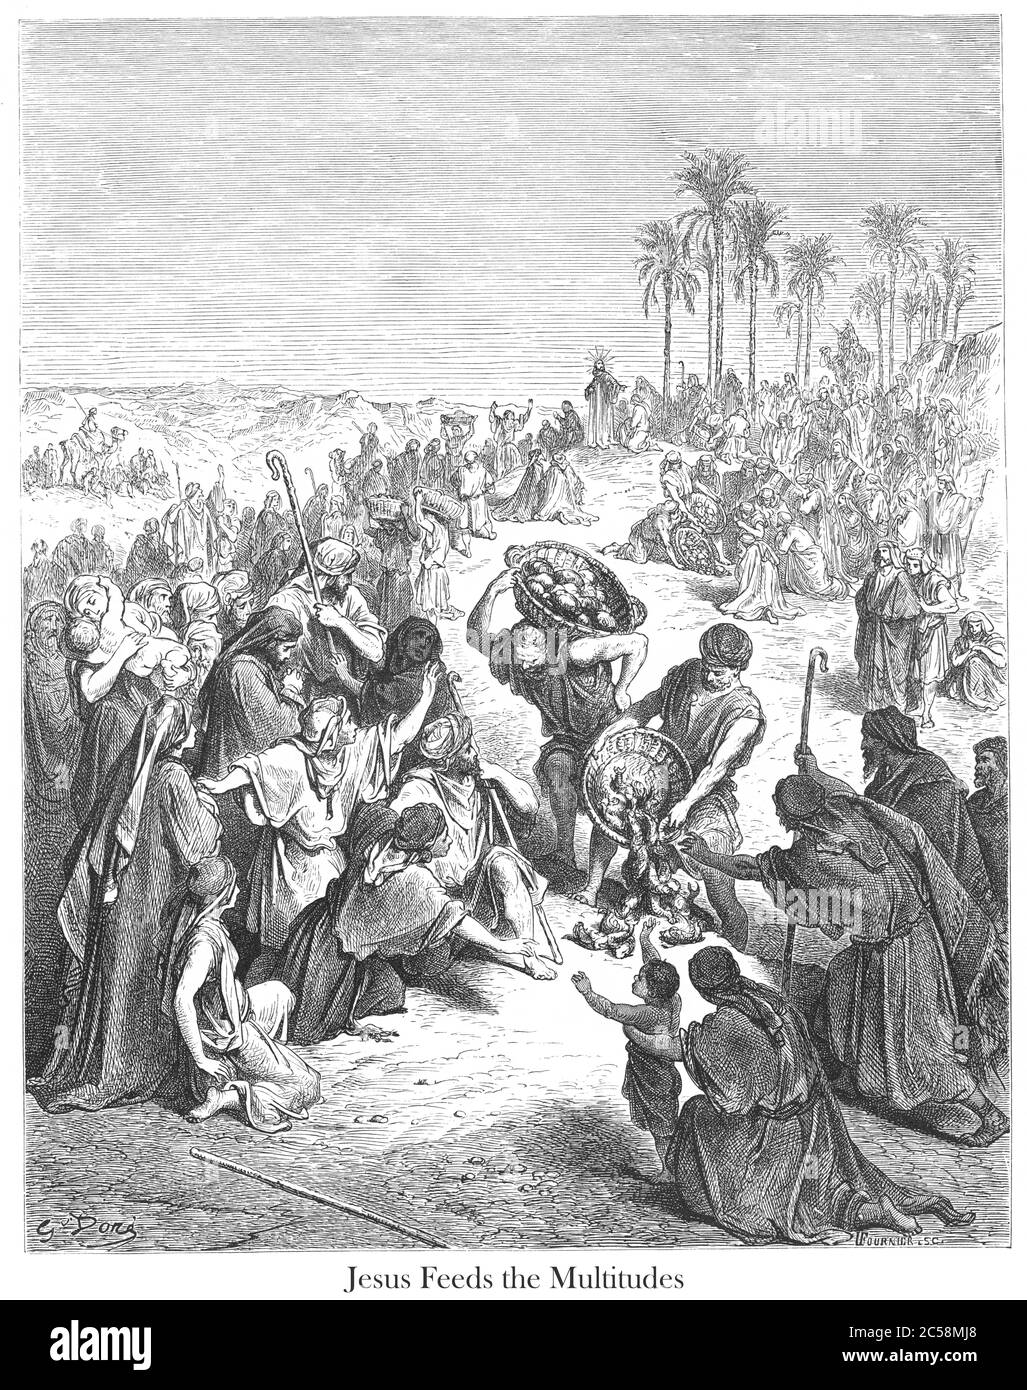 Christ Feeding the Multitude [Matthew 14:19] From the book 'Bible Gallery' Illustrated by Gustave Dore with Memoir of Dore and Descriptive Letter-press by Talbot W. Chambers D.D. Published by Cassell & Company Limited in London and simultaneously by Mame in Tours, France in 1866 Stock Photo